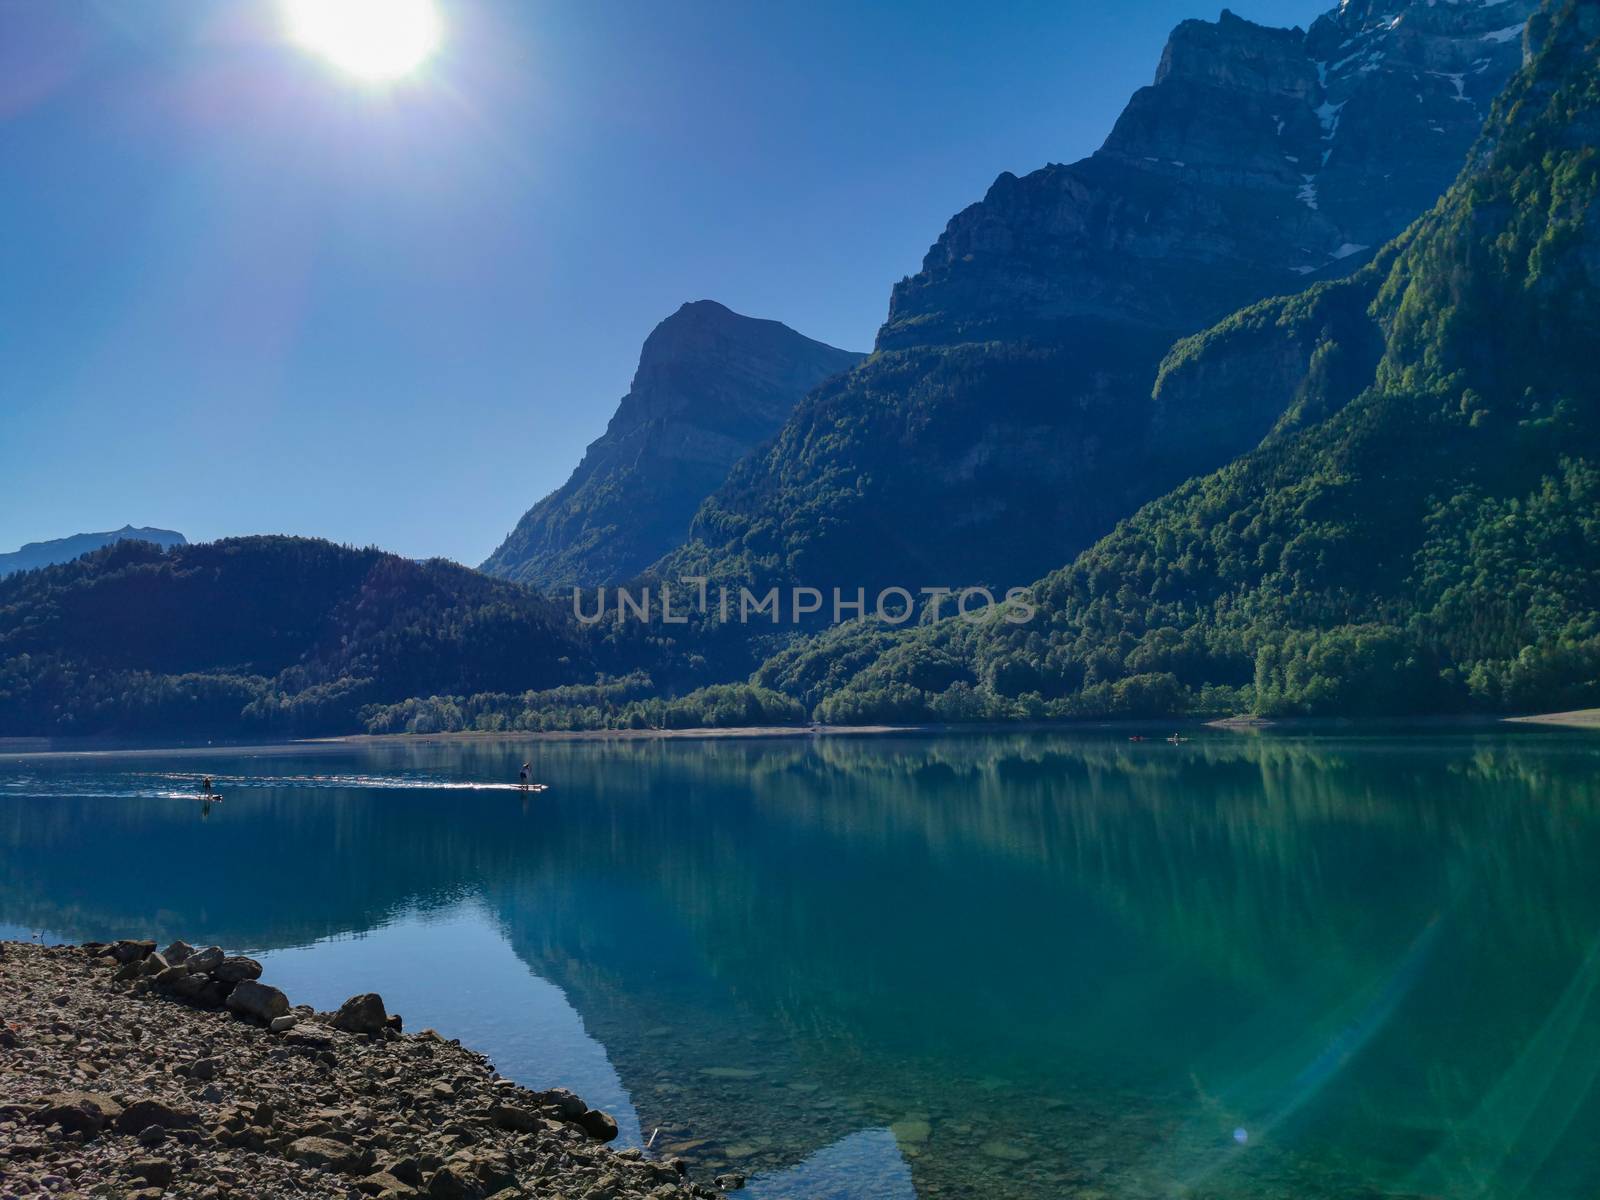 Swiss mountains and Lake. Scenic Alps and lane view. Trekking and outdoor lifestyle